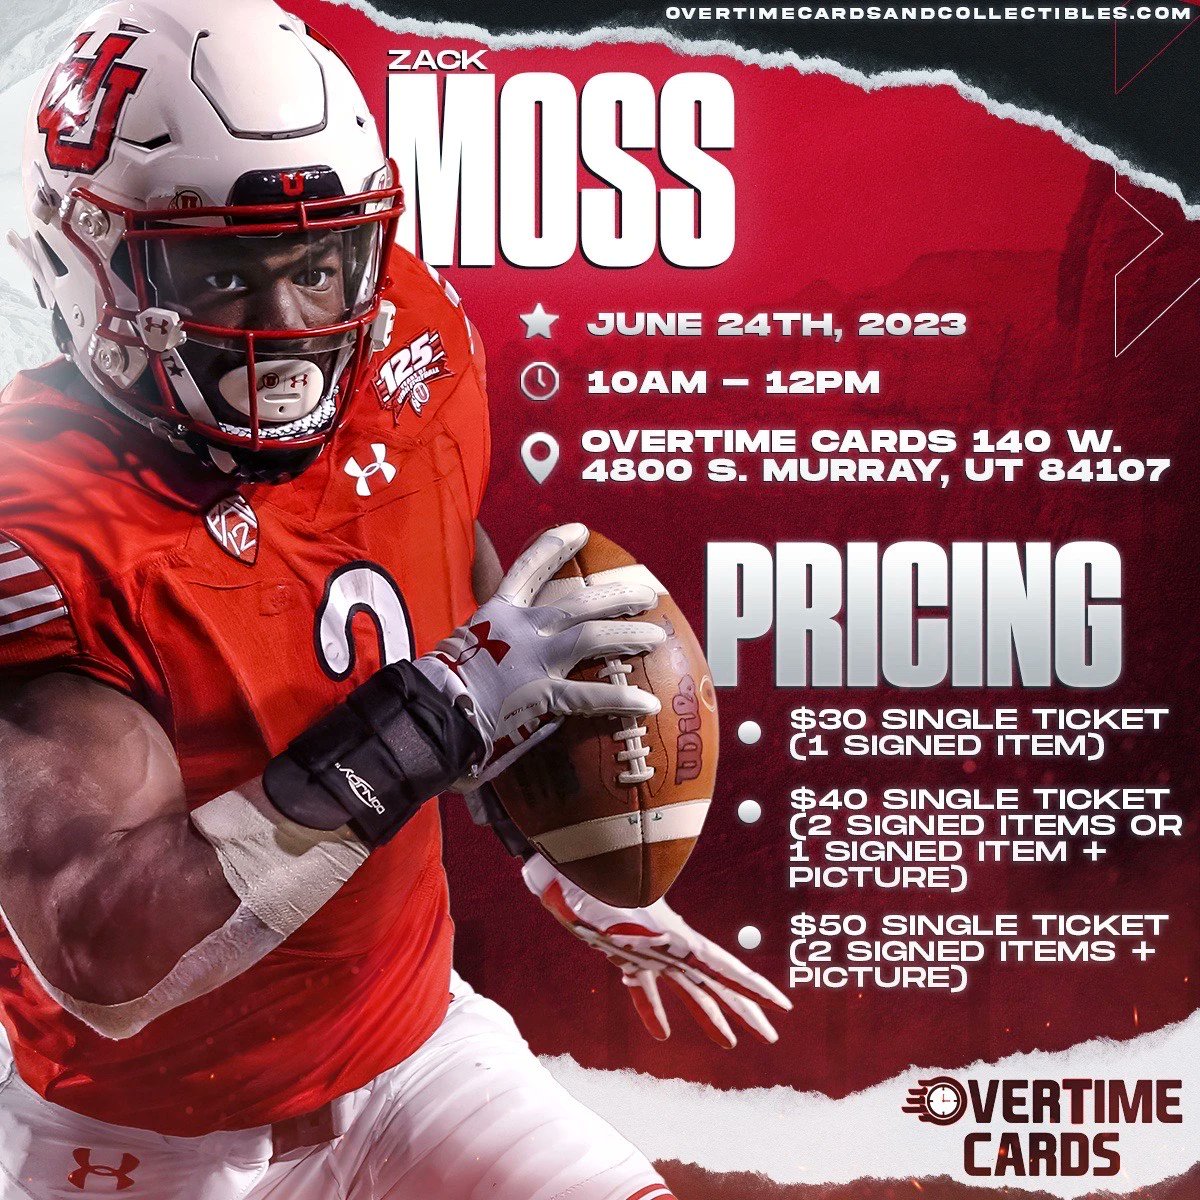 Next Saturday! Zack Moss In-store signing. Visit our website to purchase tickets! #UtahFootball #coltsnation #UtahCardShop overtimecardsandcollectibles.com/zack-moss-in-s…